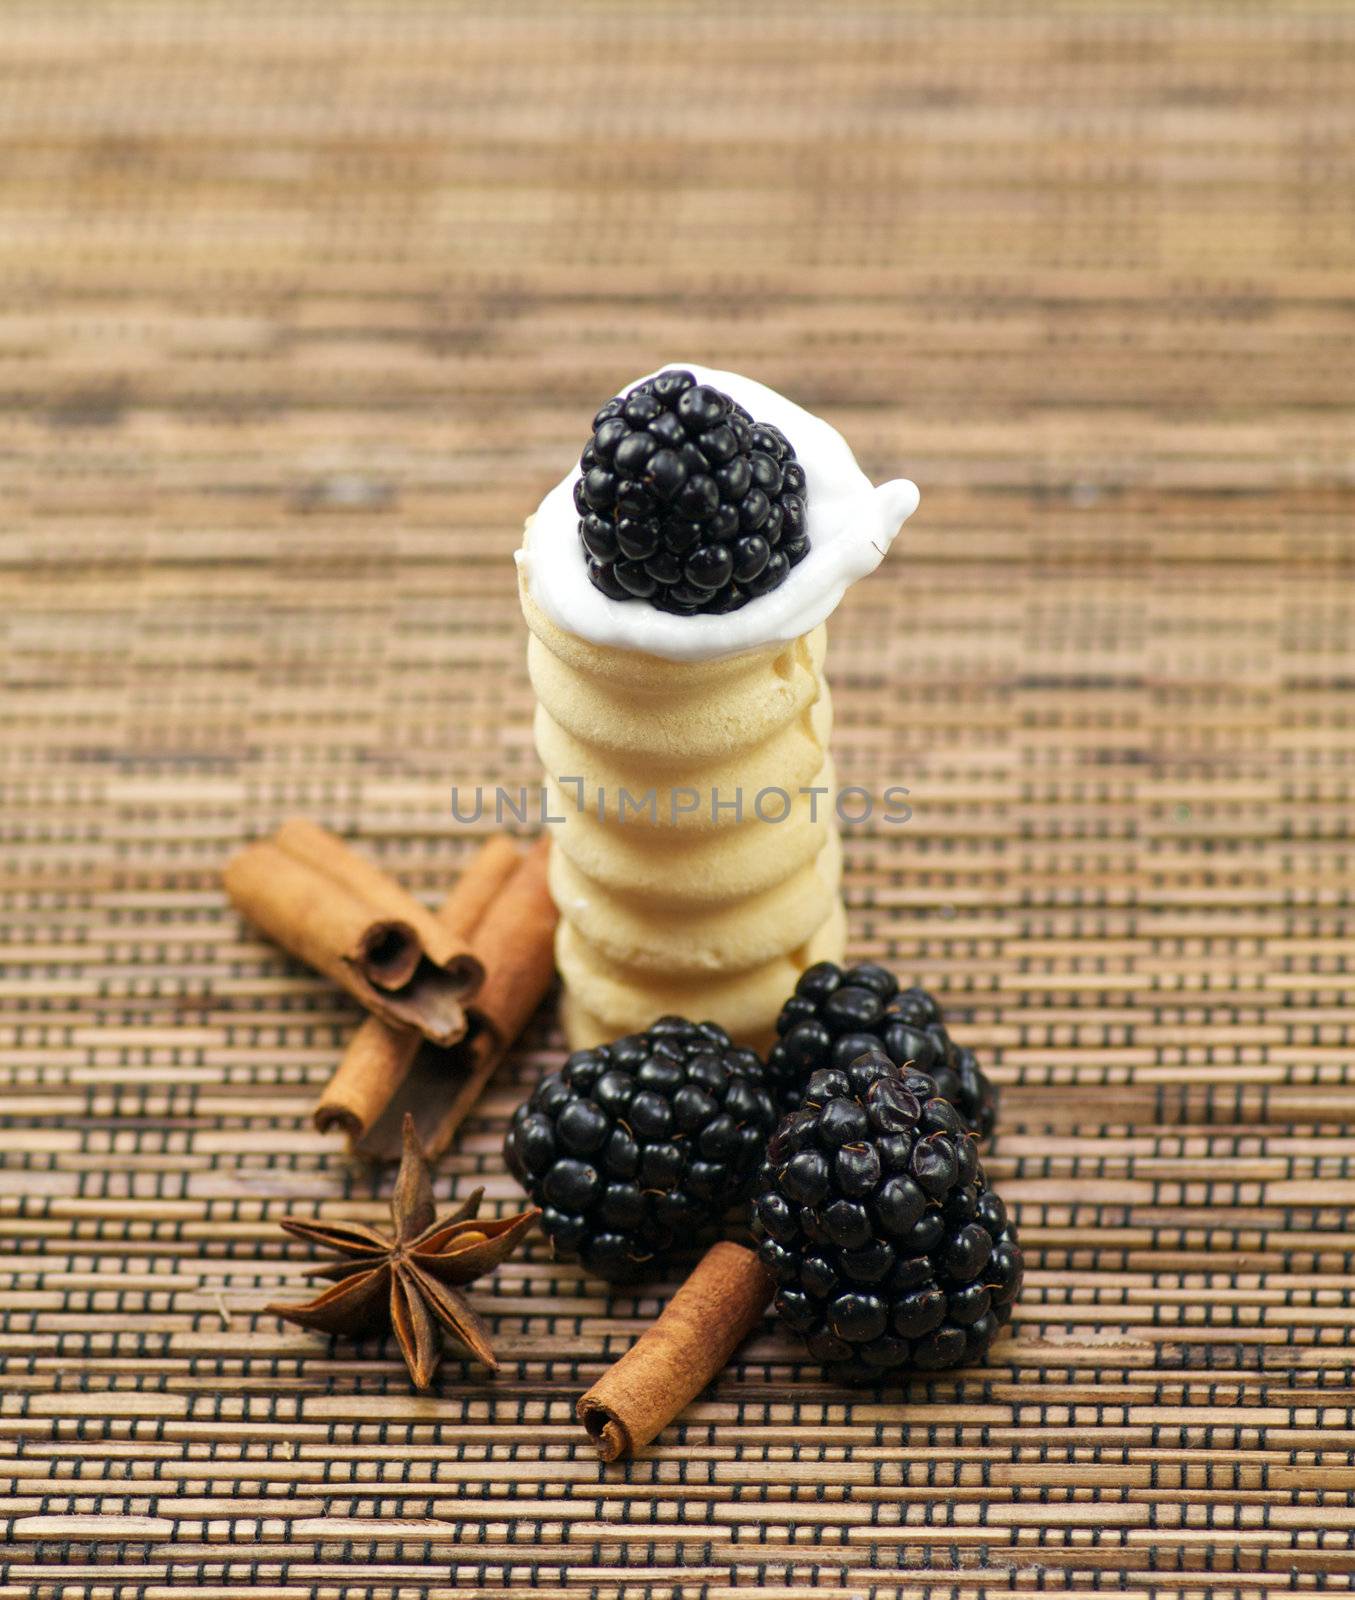 Small baskets from shortcake dough with whipped cream, a blackberry, cinnamon and anise